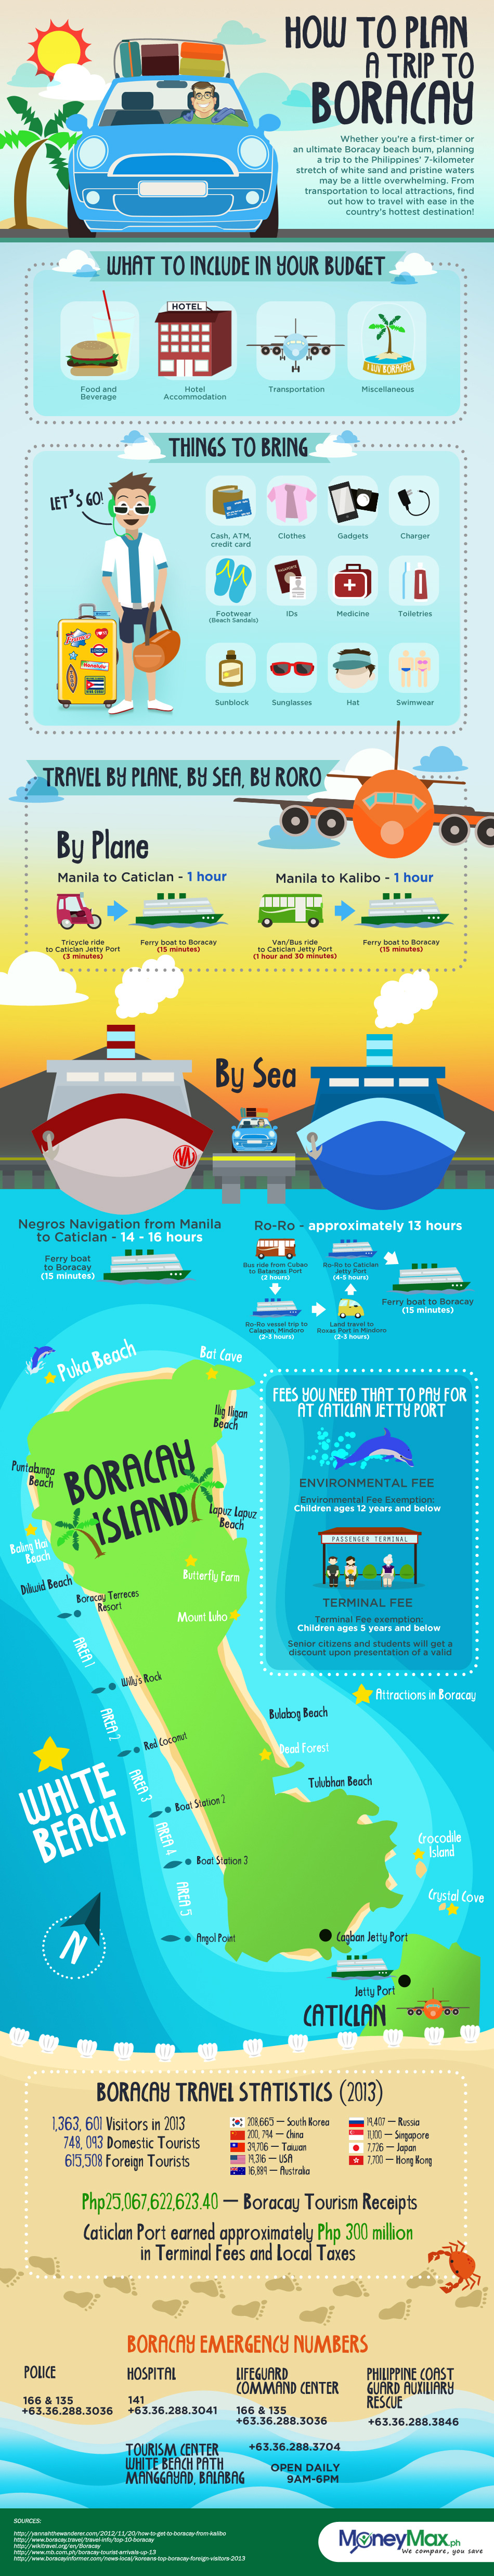 Infographic - Boracay Tips and Guides